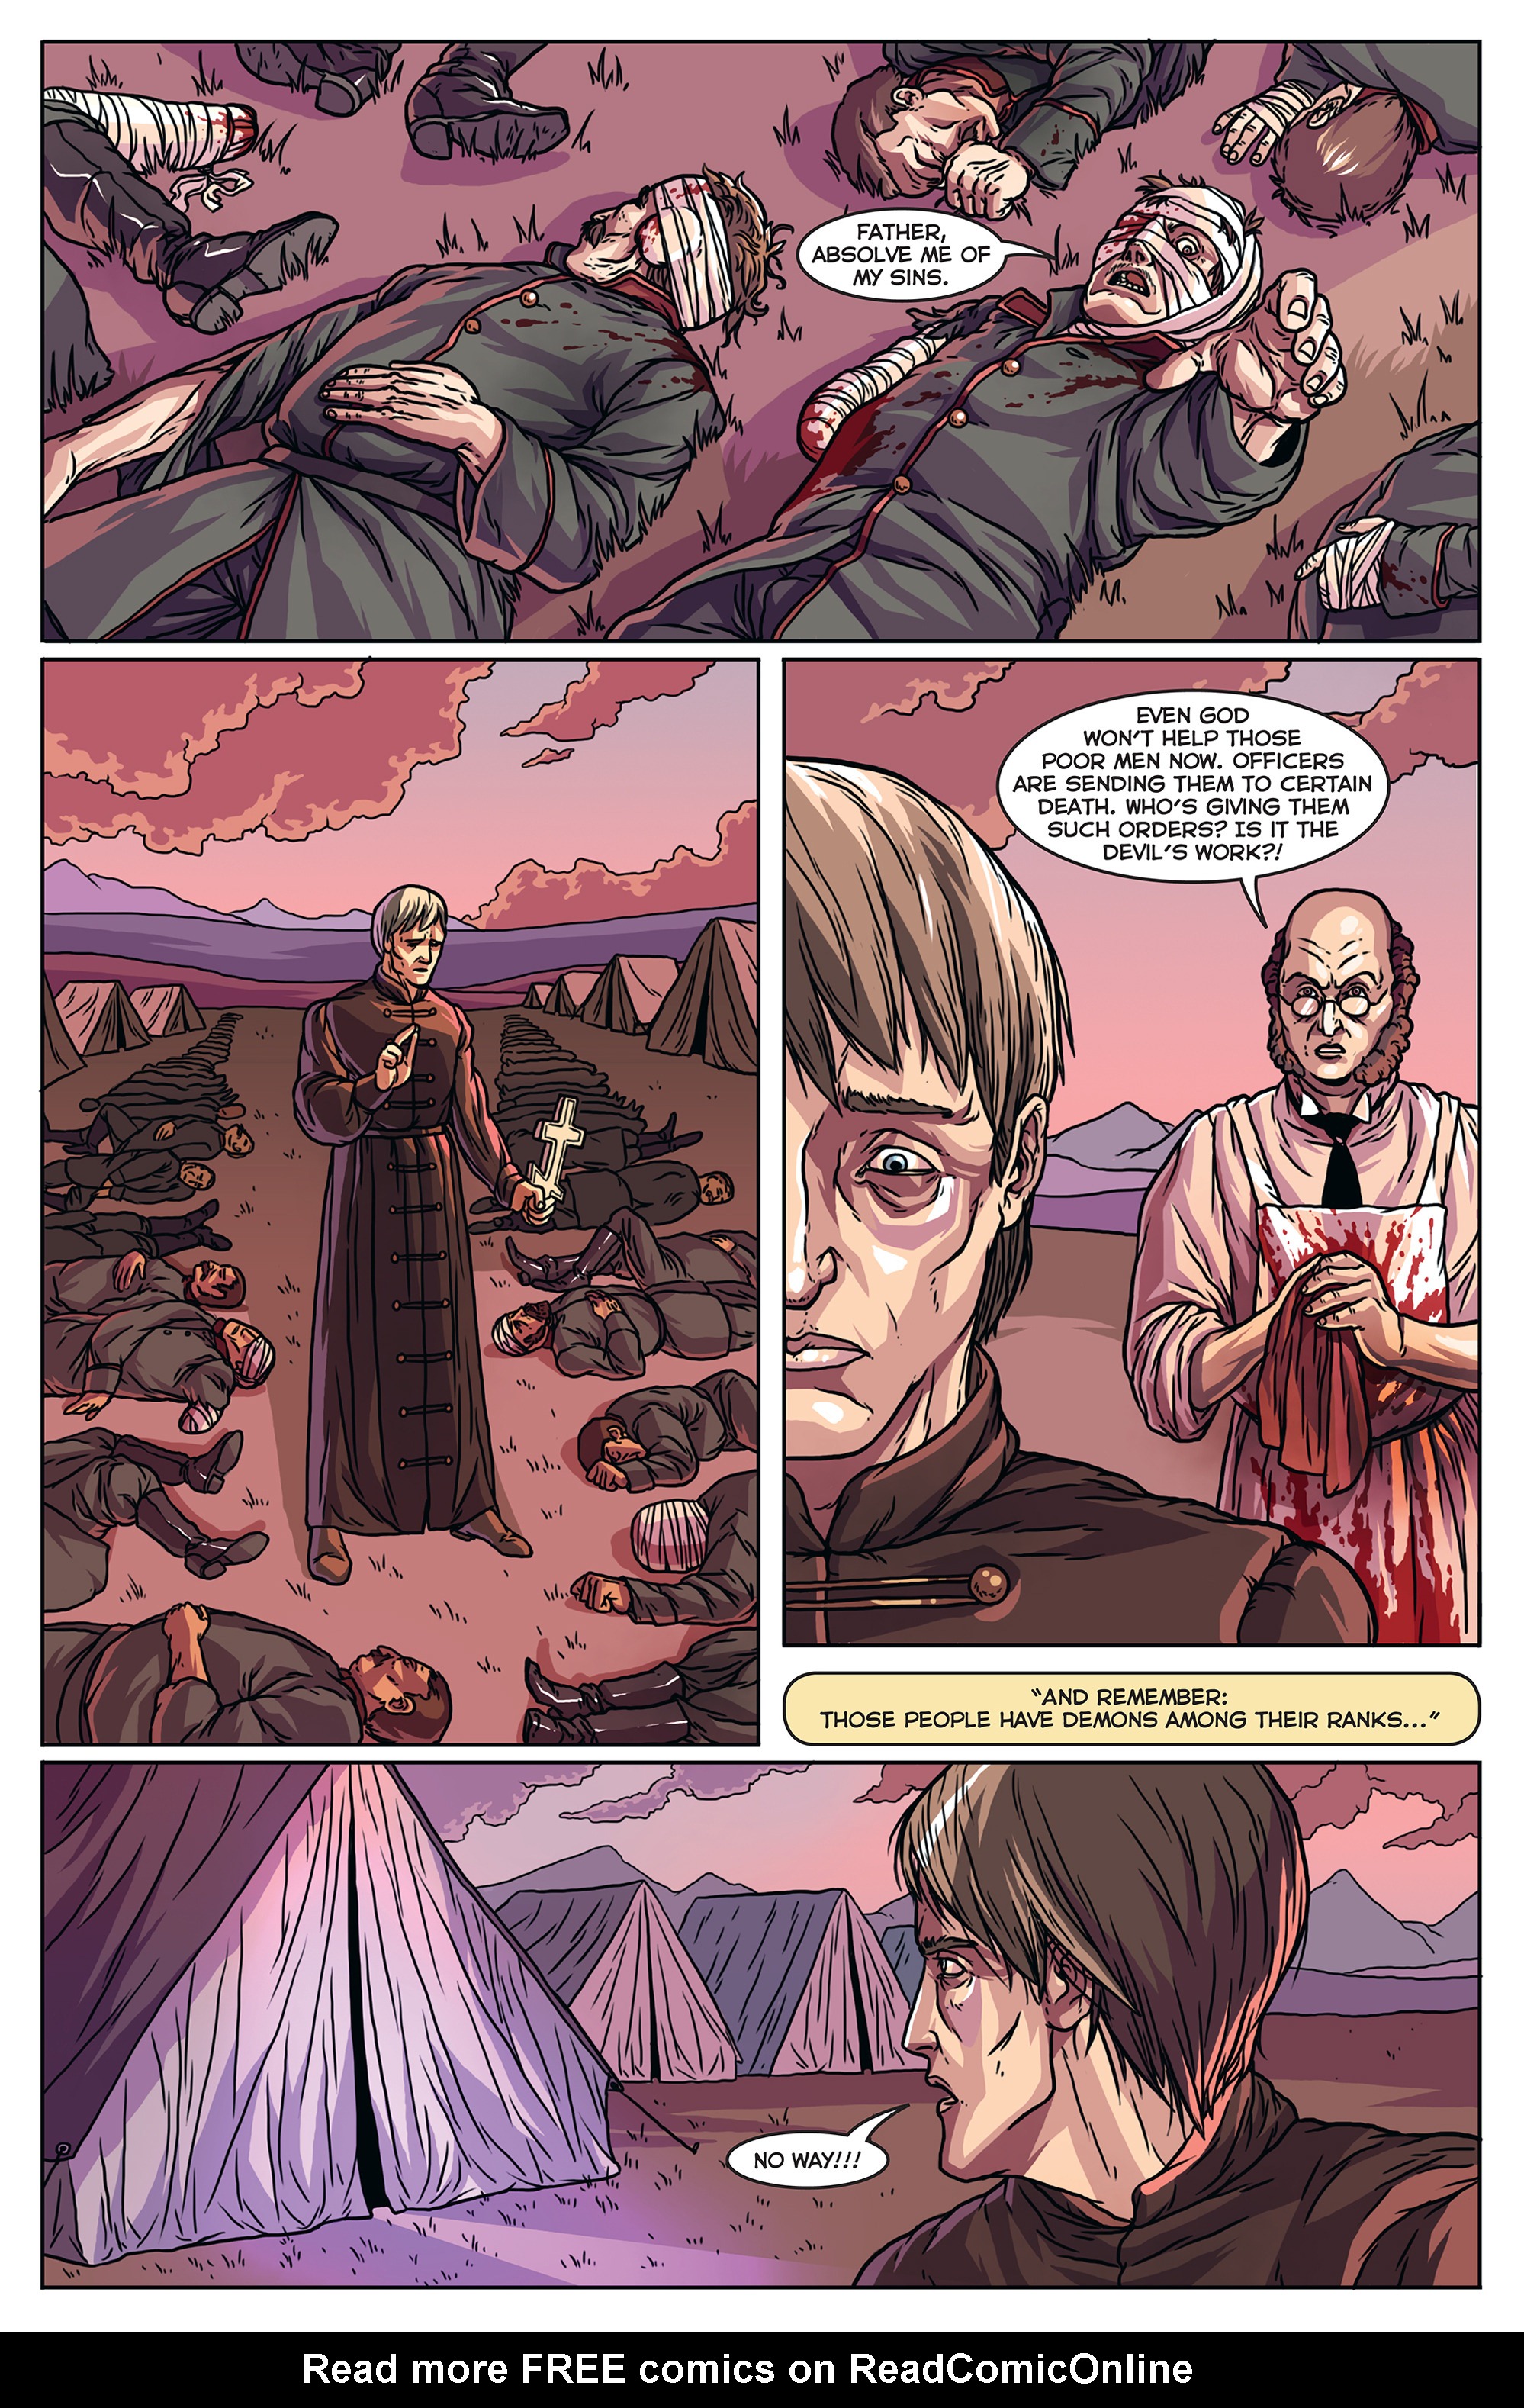 Read online Friar comic -  Issue #2 - 24